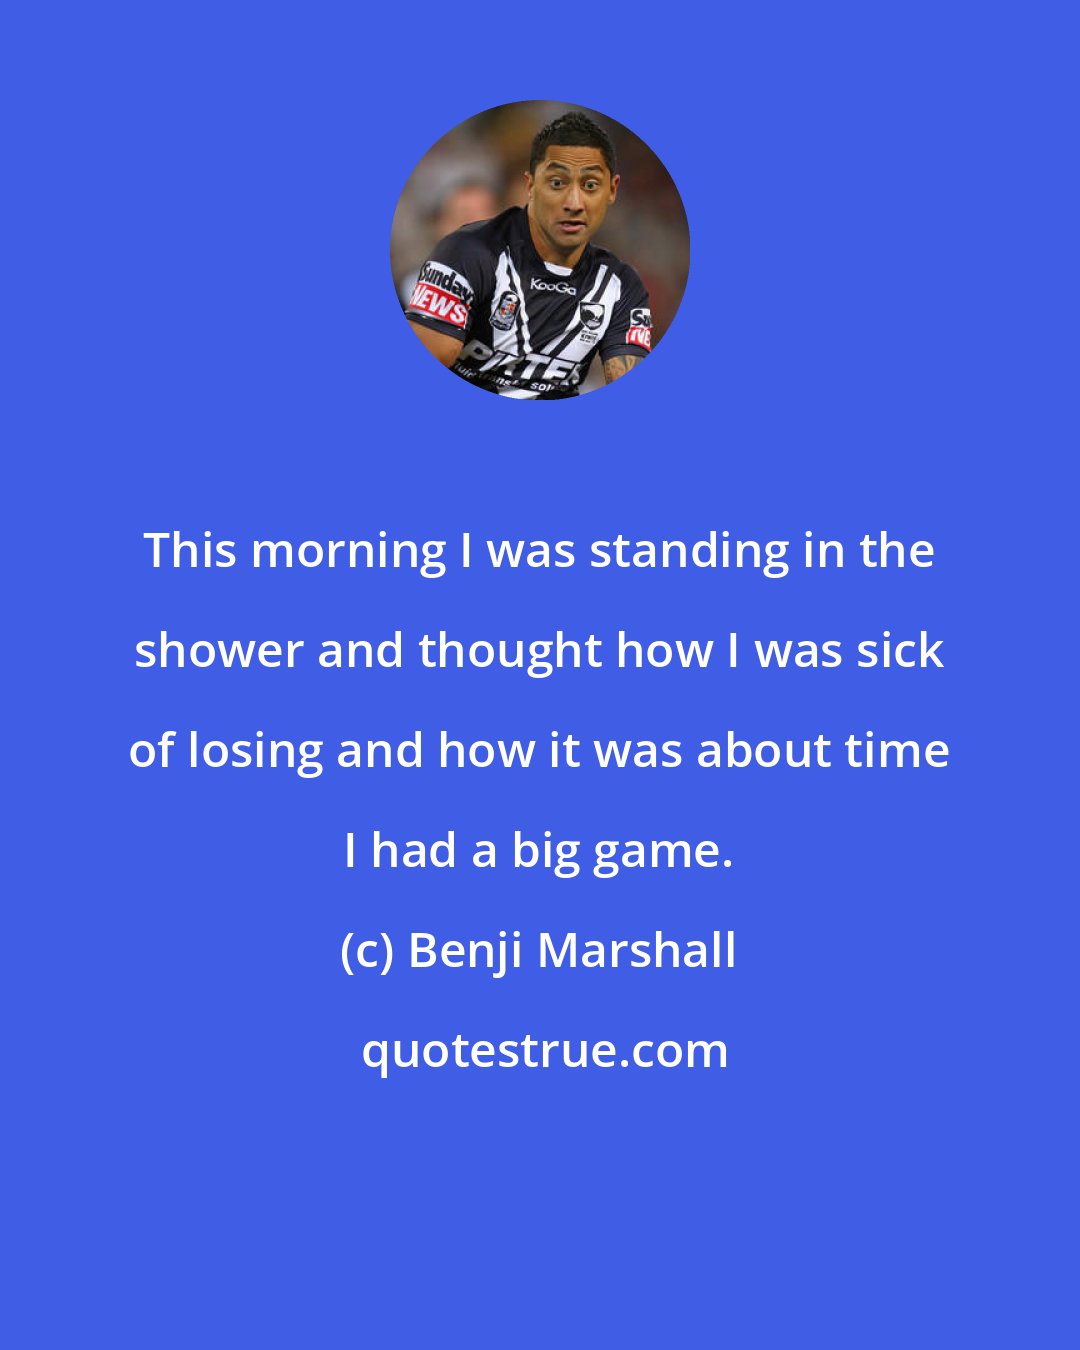 Benji Marshall: This morning I was standing in the shower and thought how I was sick of losing and how it was about time I had a big game.